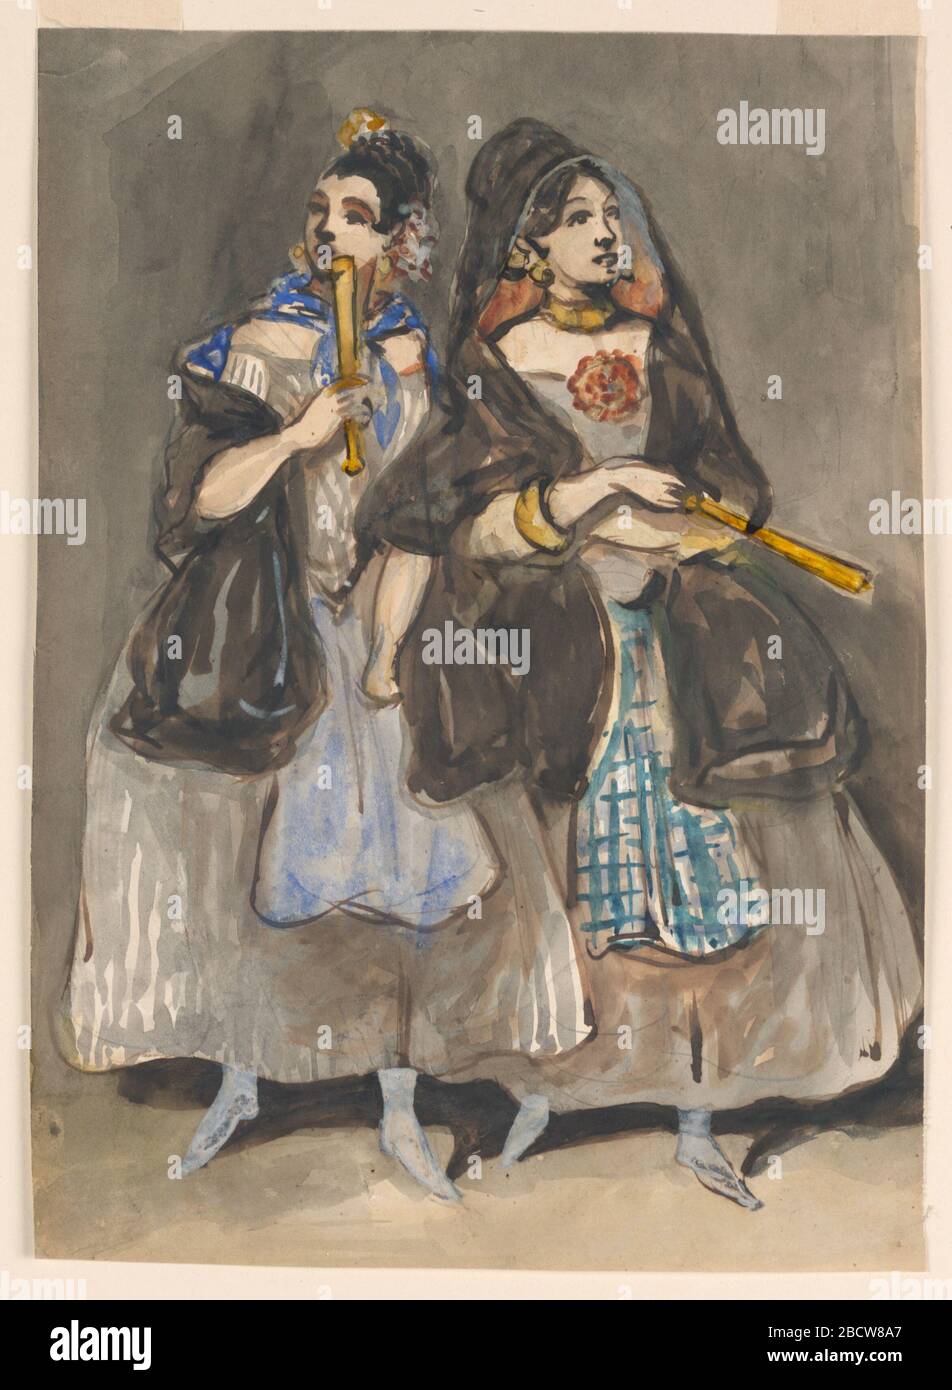 Two Spanish Women Promenading. Research in ProgressVertical rectangle. Two Spanish women promenading, both wearing gray skirts, blue aprons, black scarves, gold jewelry and holding fans with gold-colored sticks. Woman on left wears bright blue scarf and apron; woman on right wears a plaid apron. Two Spanish Women Promenading Stock Photo